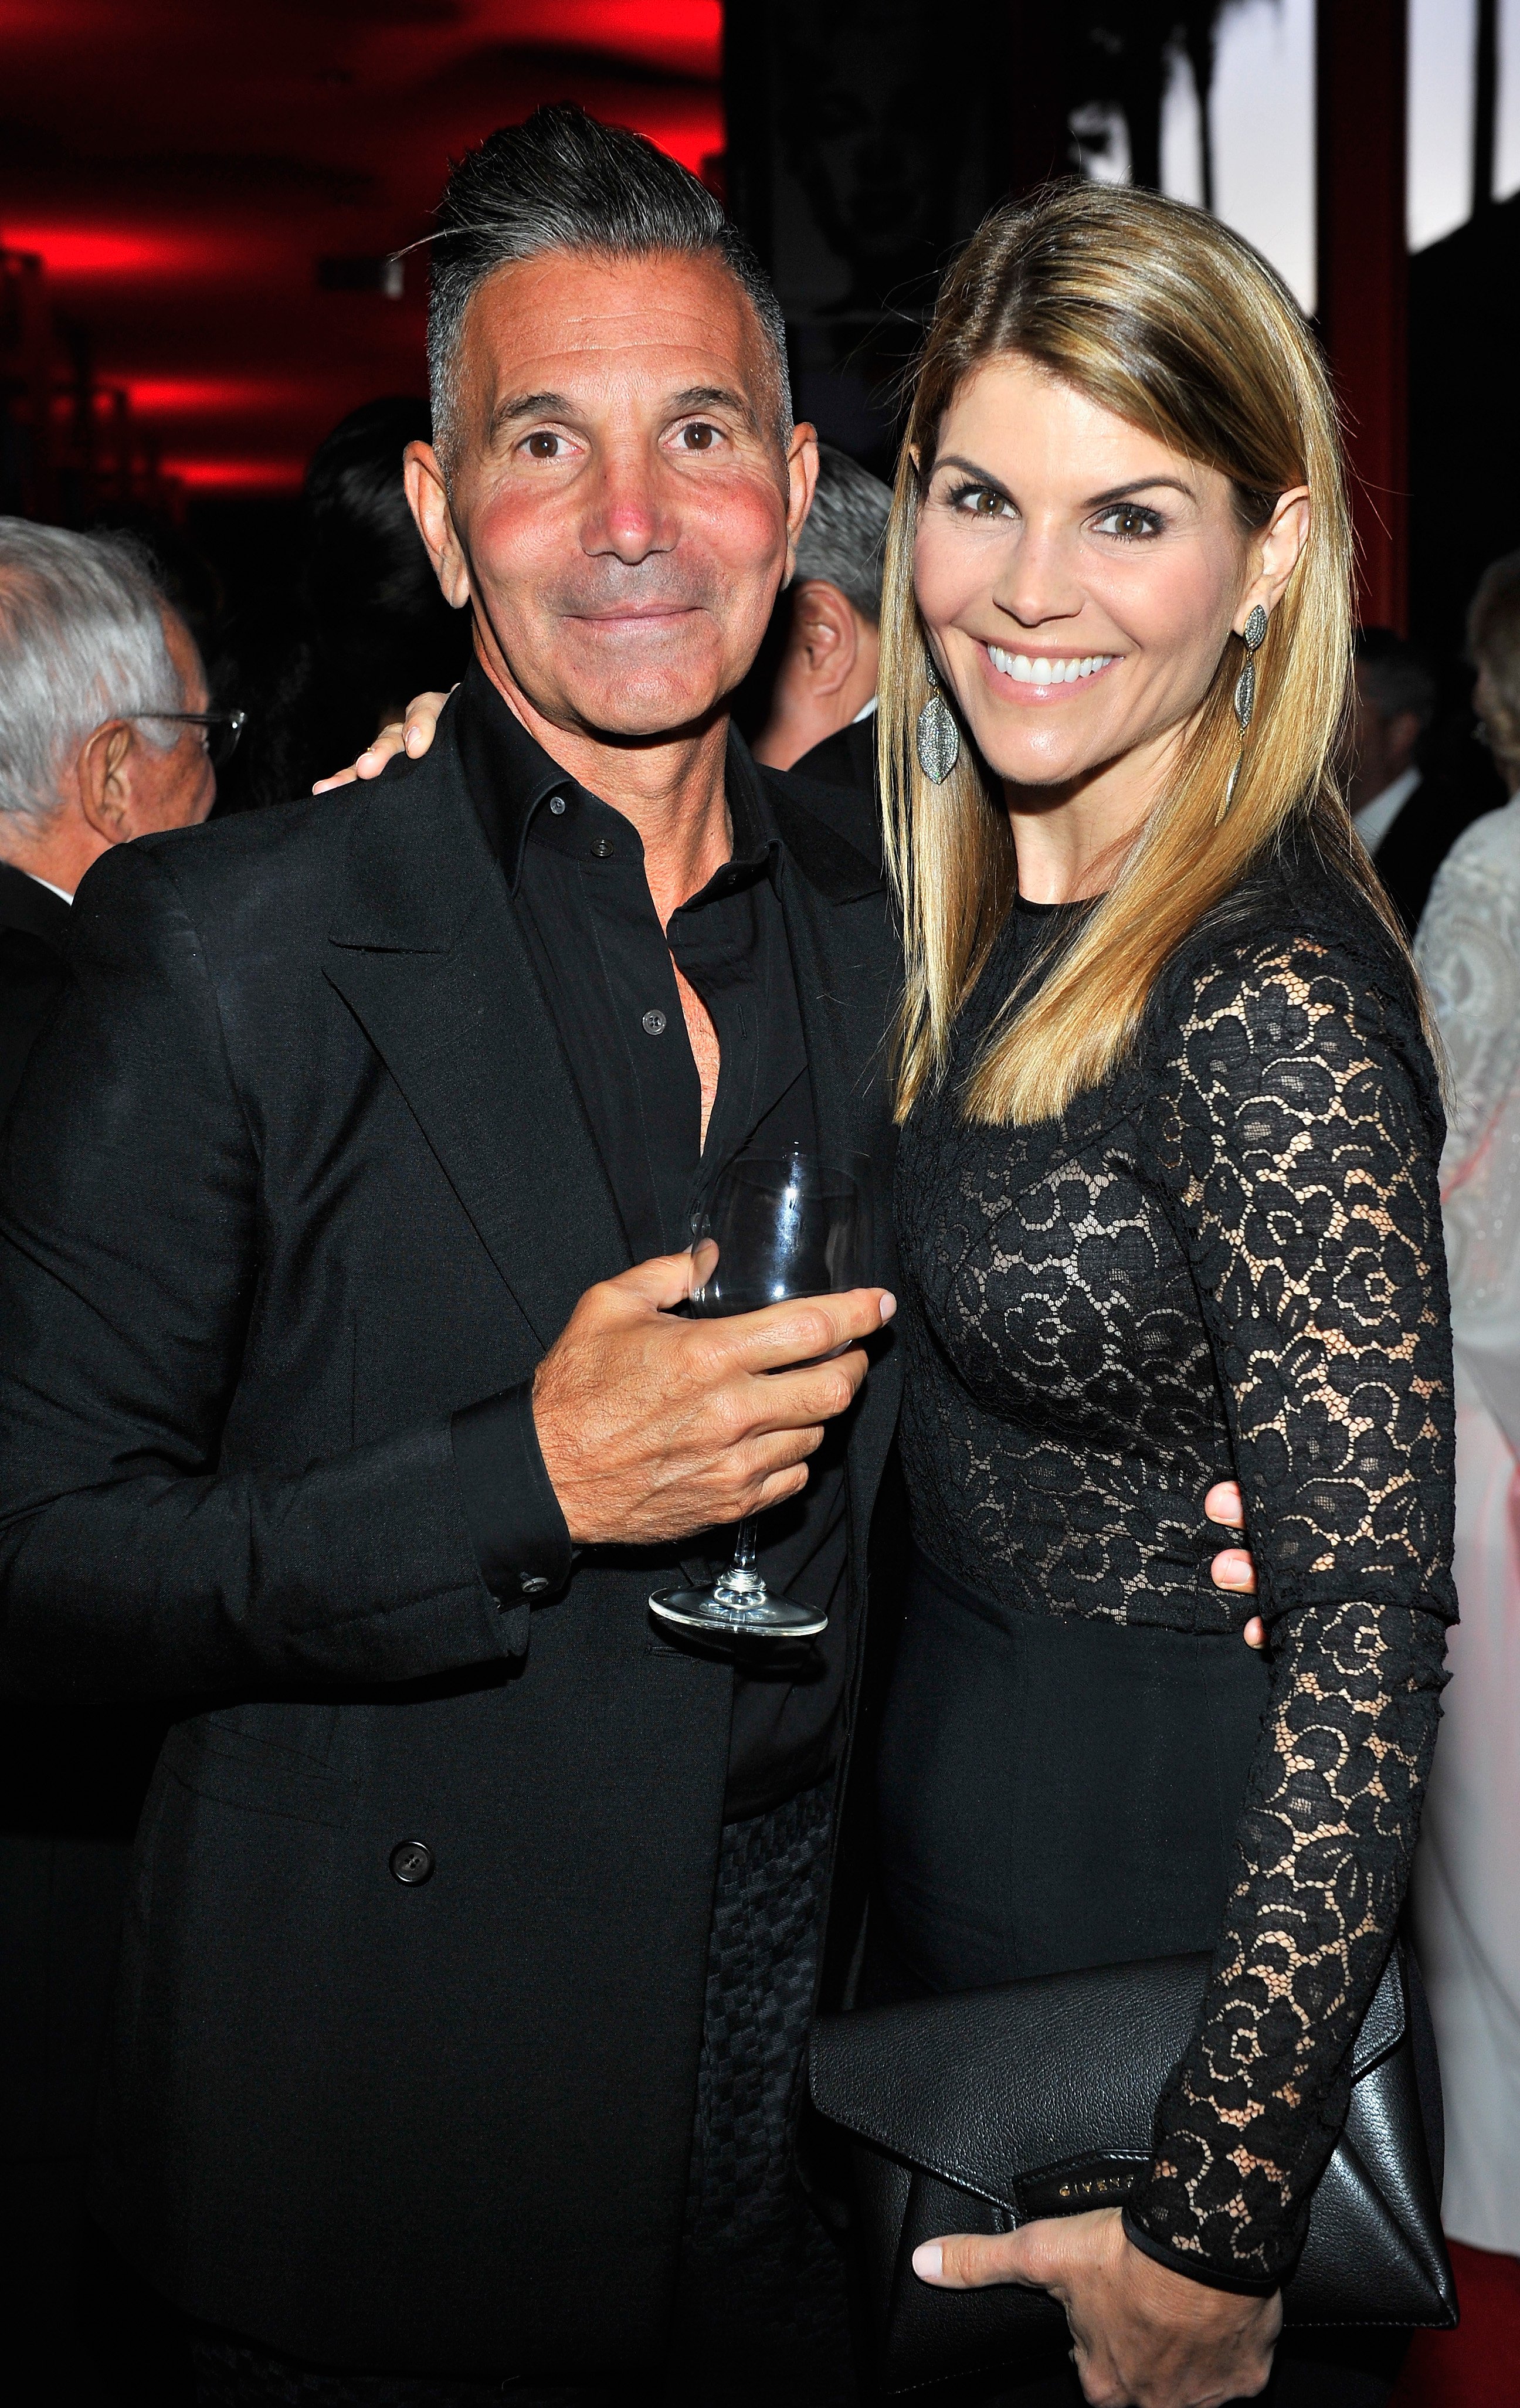 Mossimo Giannulli and his wife, Lori Loughlin attending an event in Los Angeles in April, 2015. | Photo: Getty Images.